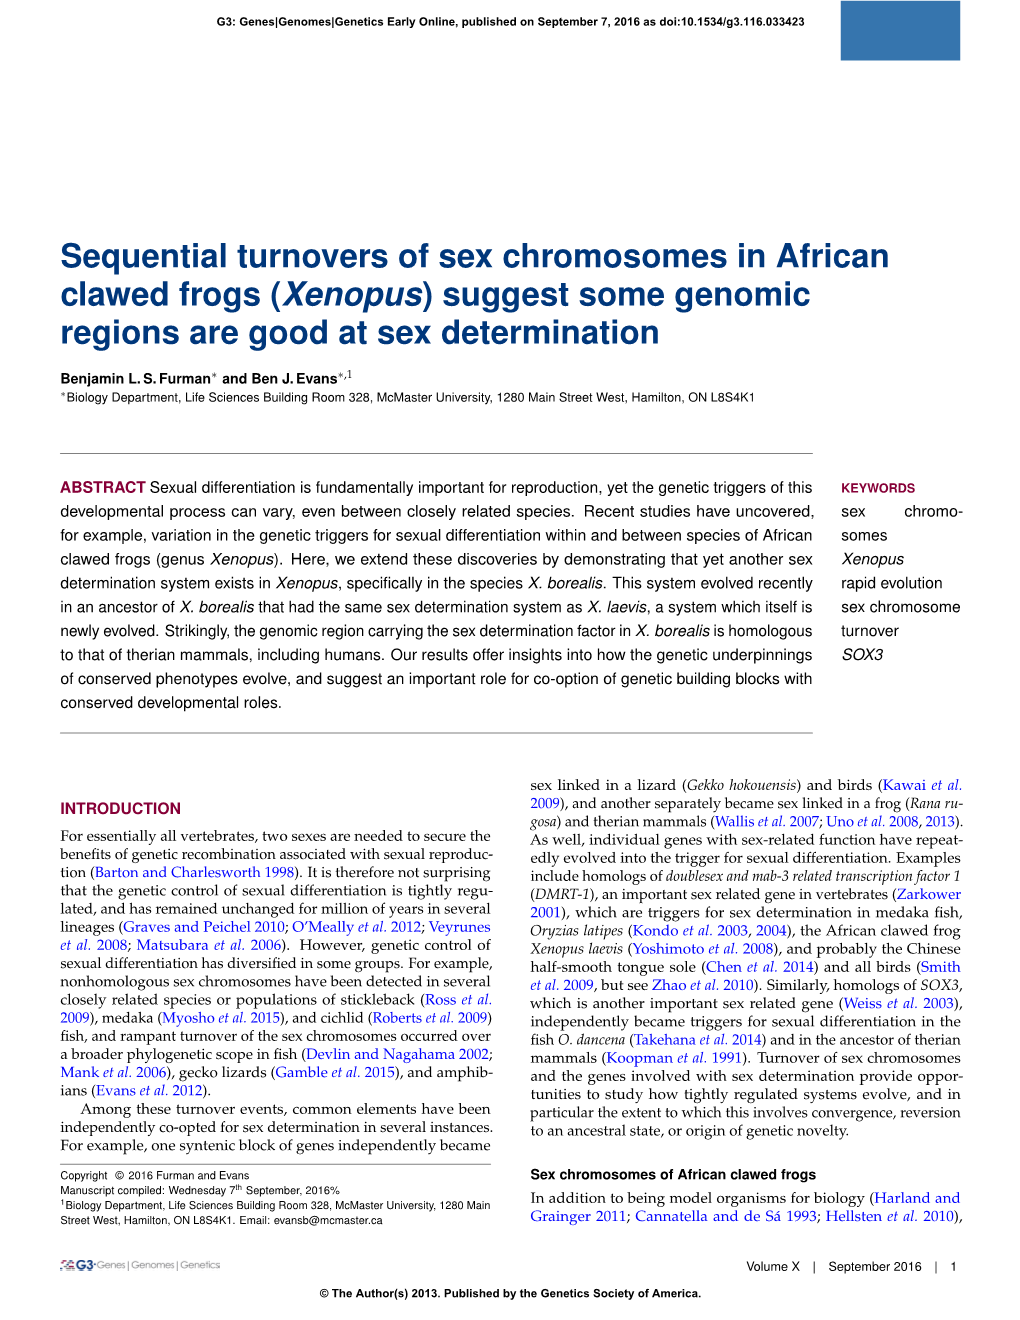 Sequential Turnovers of Sex Chromosomes in African Clawed Frogs (Xenopus) Suggest Some Genomic Regions Are Good at Sex Determination